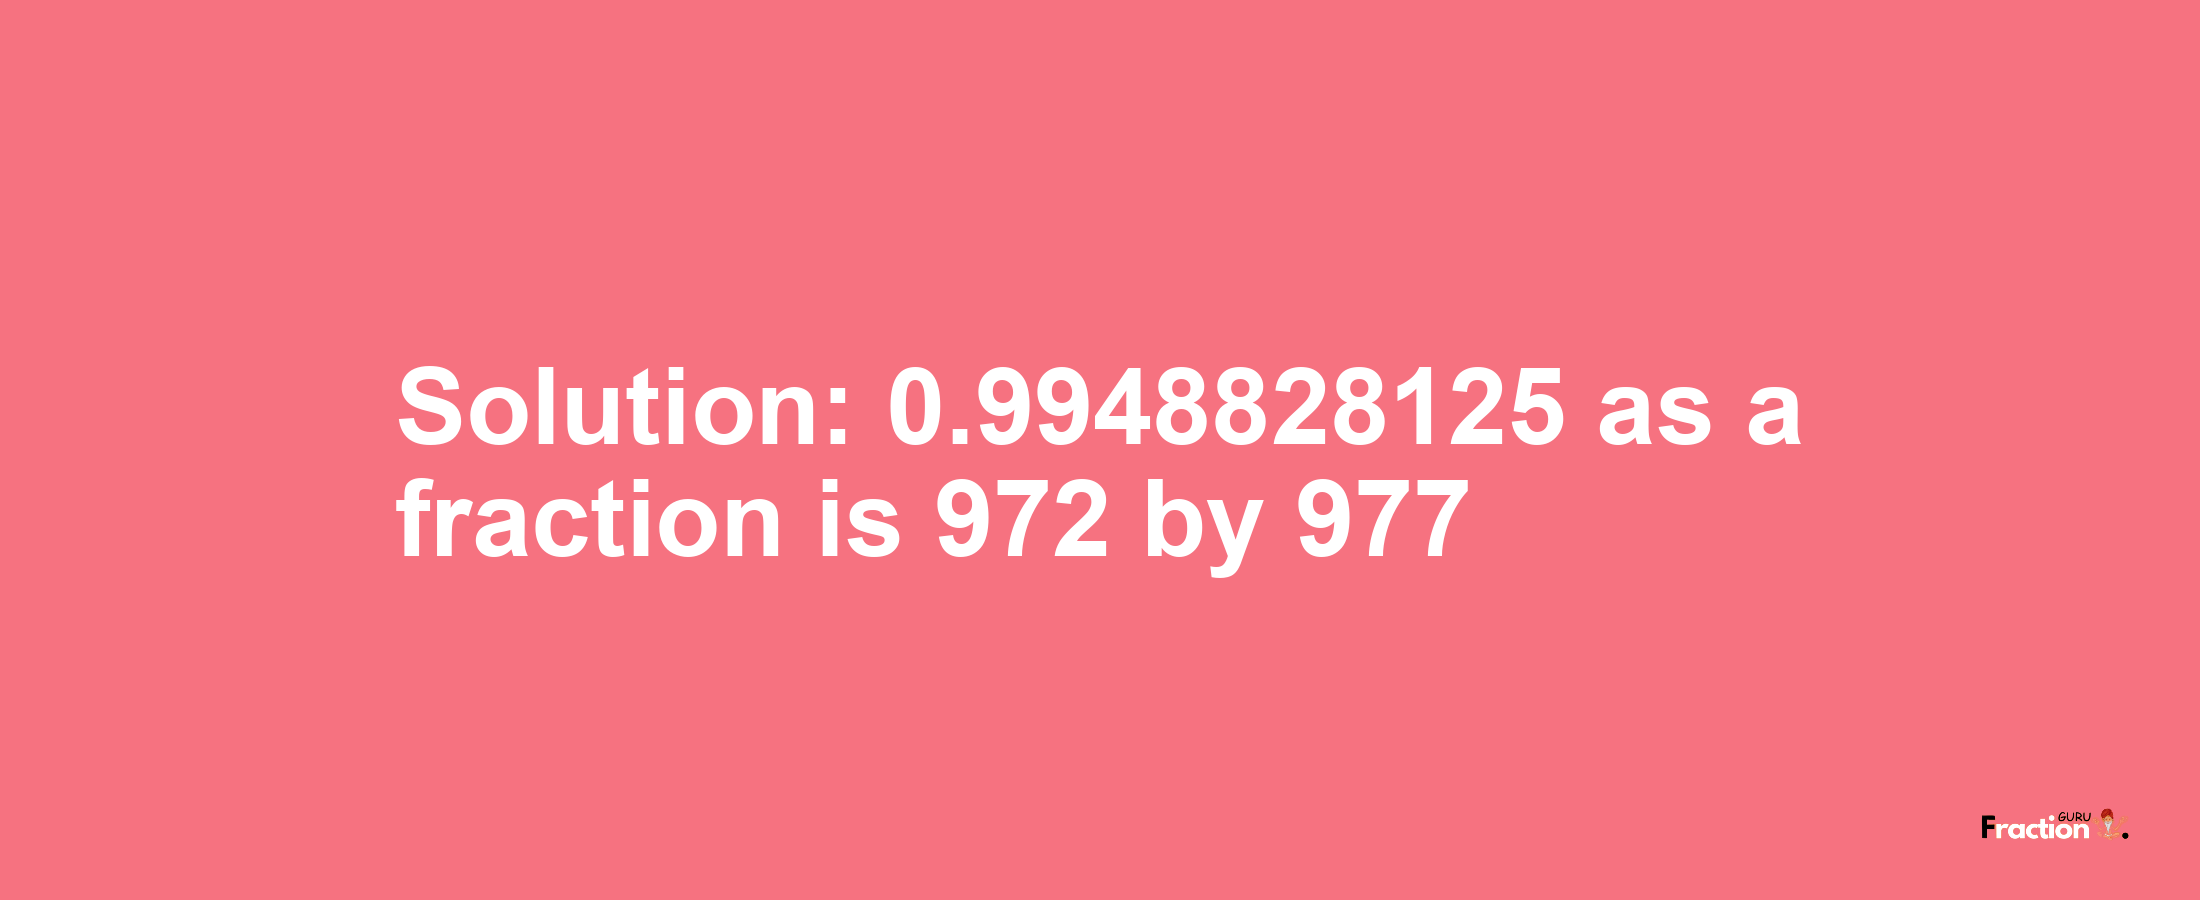 Solution:0.9948828125 as a fraction is 972/977